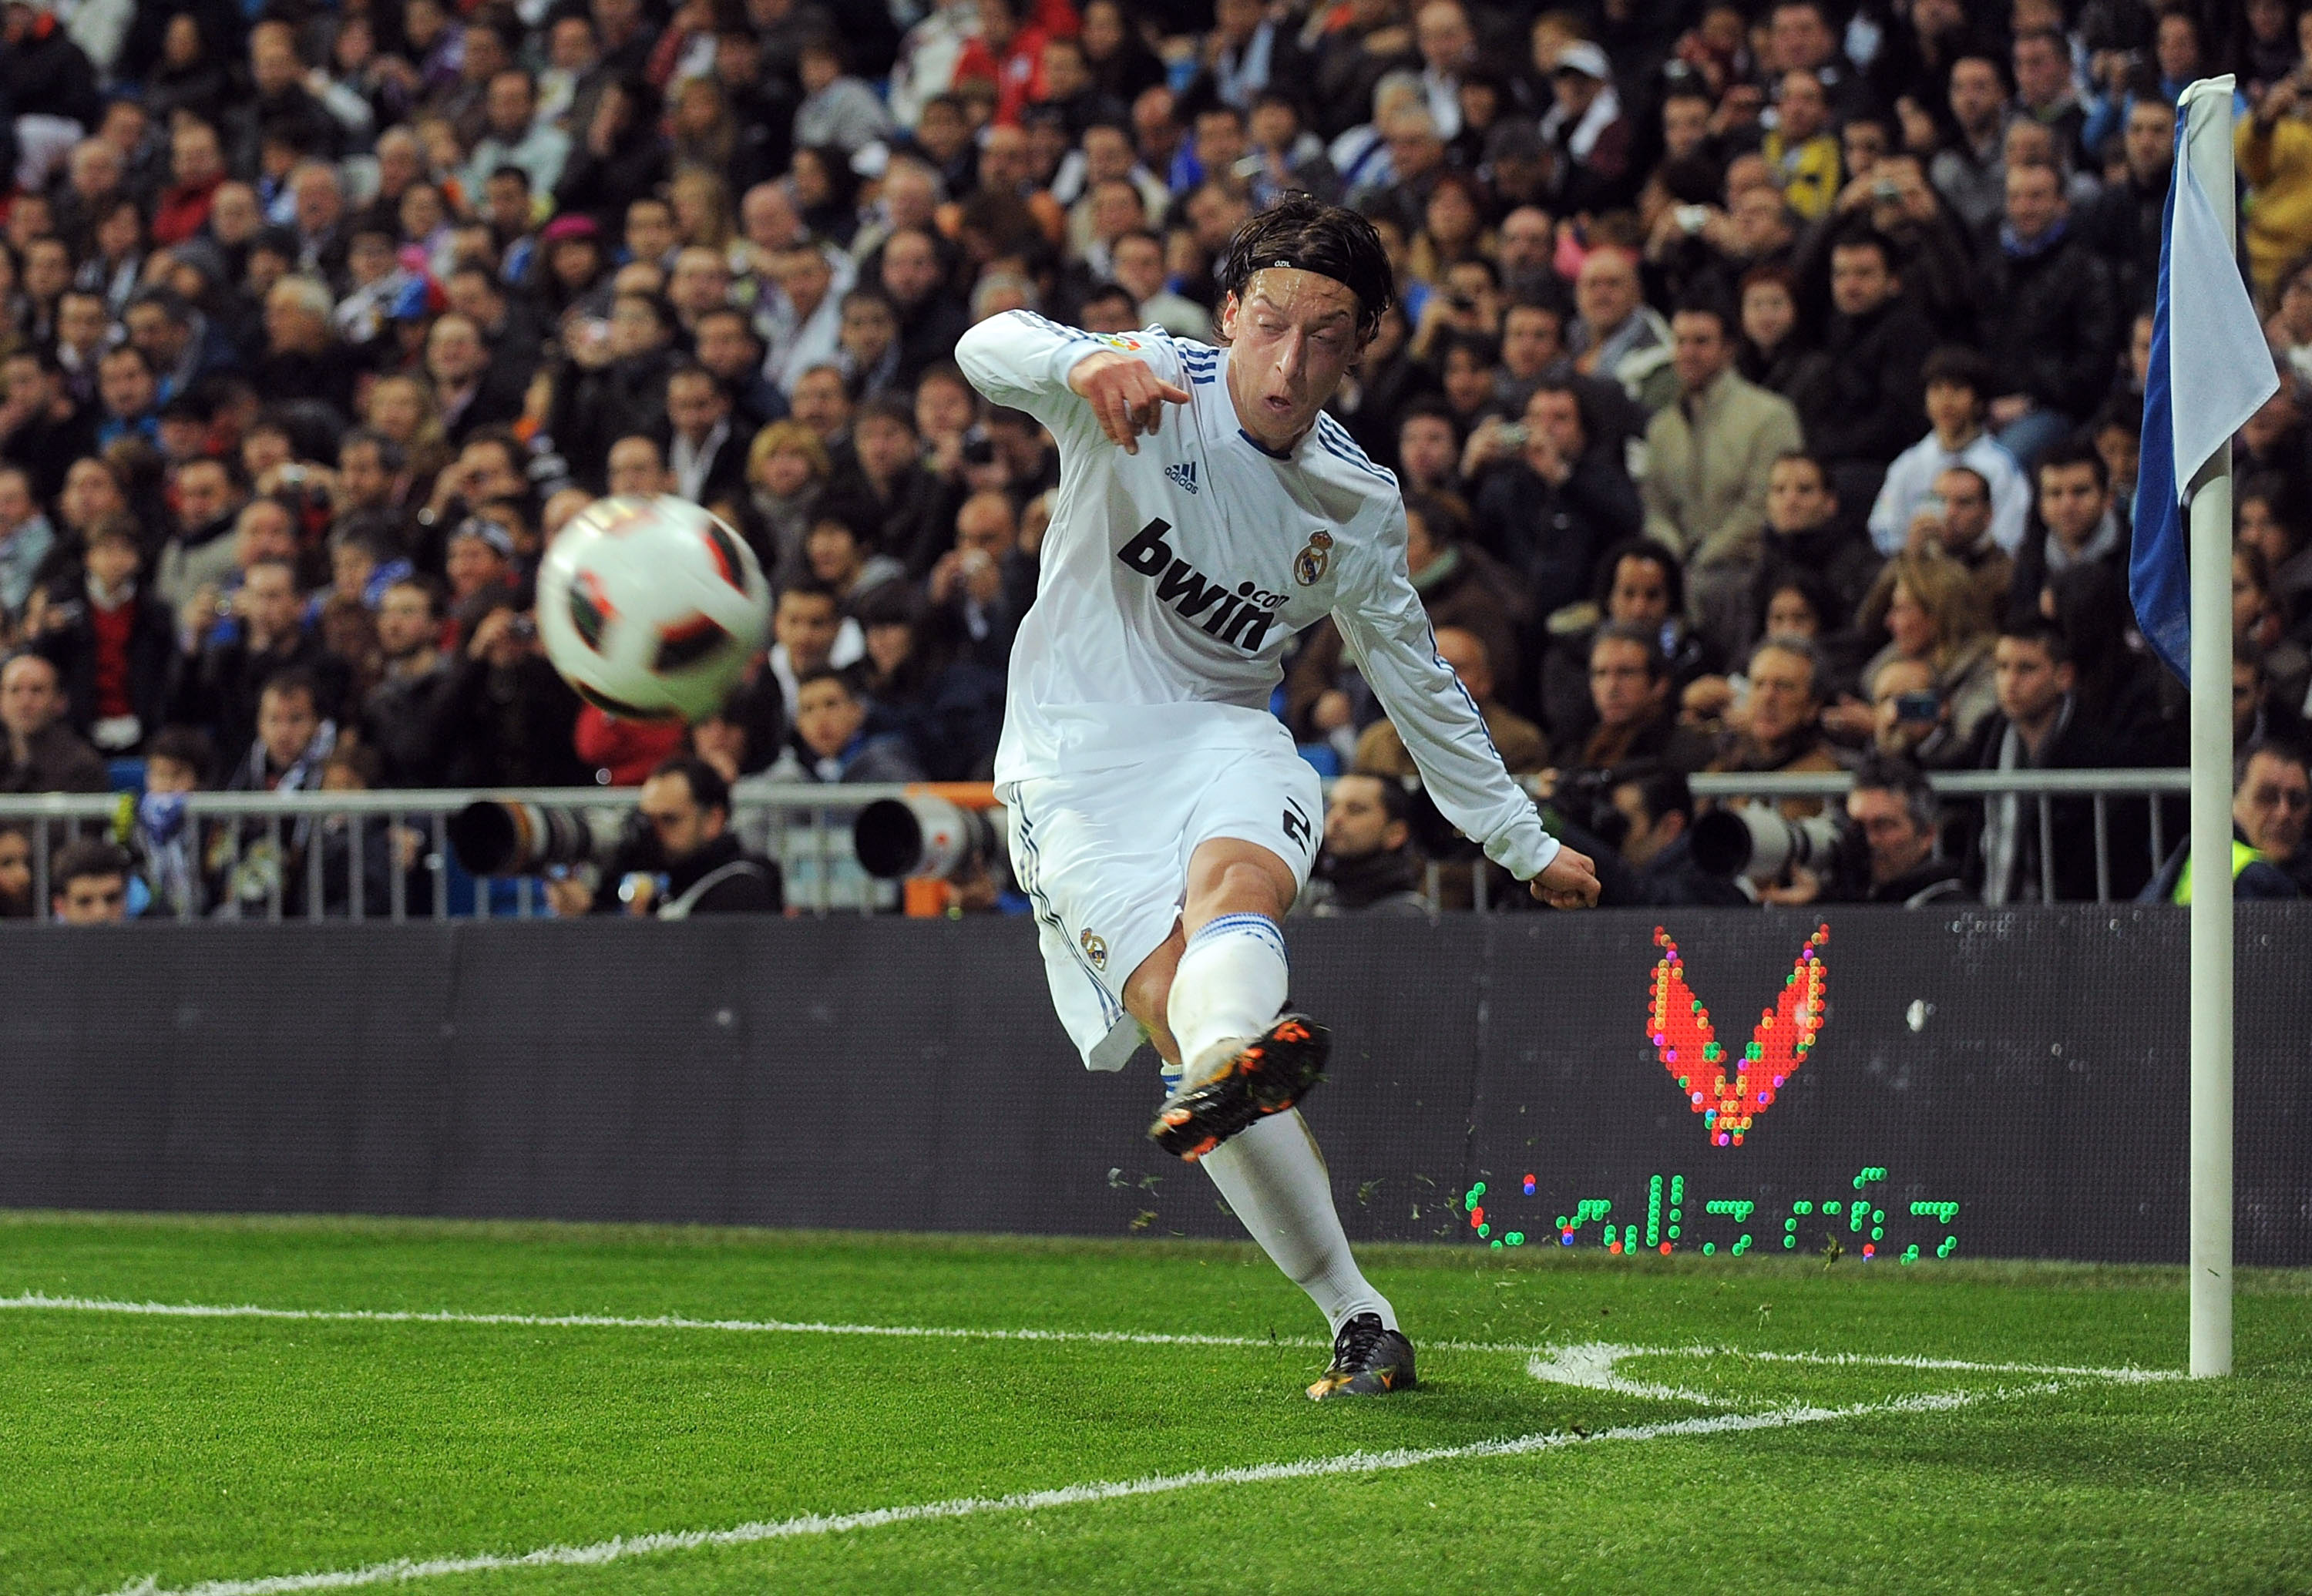 MADRID, SPAIN - MARCH 12: Mesut Ozil of Real Madrid takes a corner kick during the La Liga match between Real Madrid and Hercules CF at Estadio Santiago Bernabeu on March 12, 2011 in Madrid, Spain.  (Photo by Denis Doyle/Getty Images)